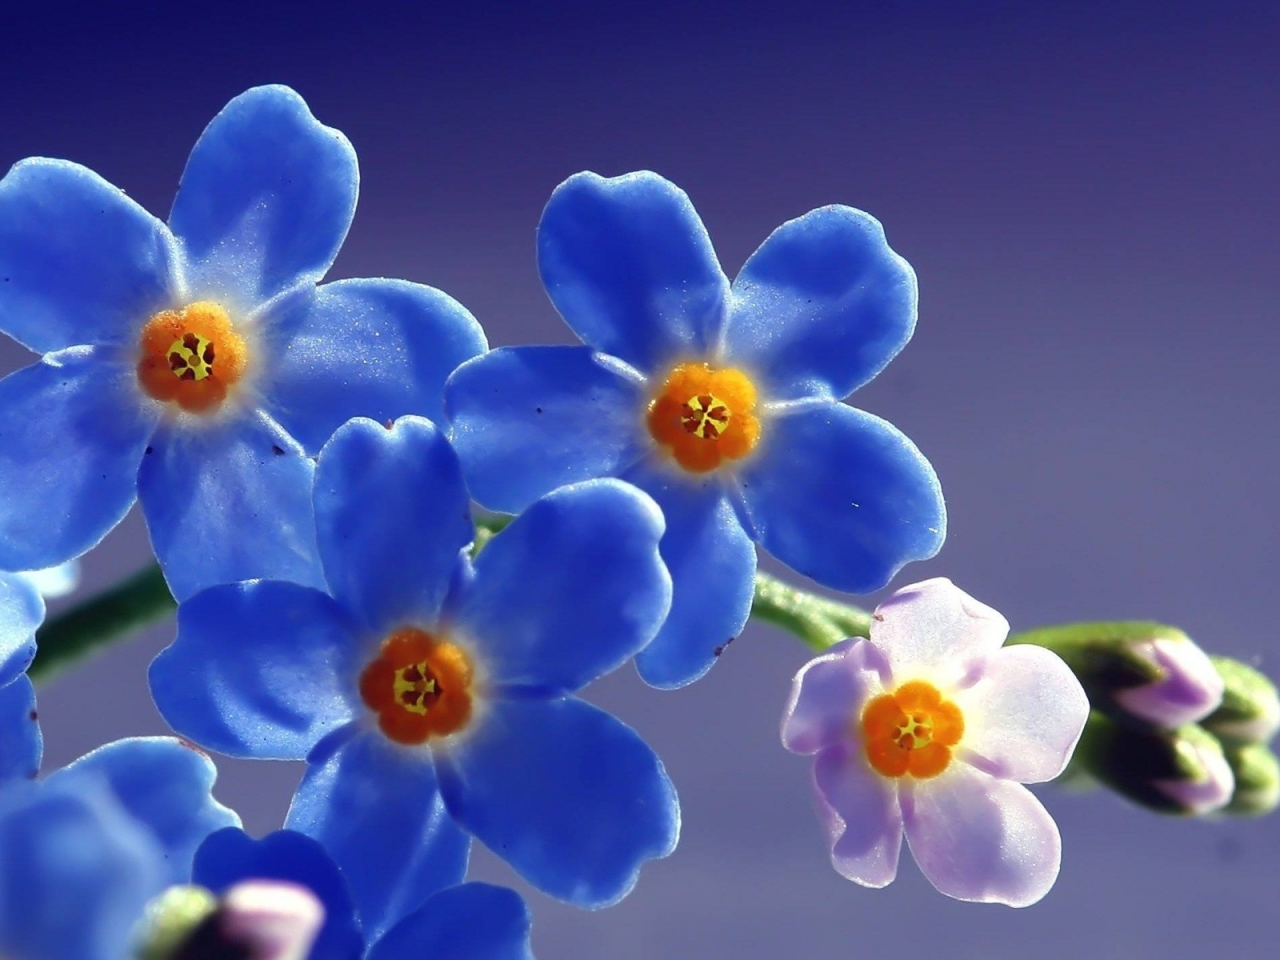 Blue Forget Me Not Flower for 1280 x 960 resolution